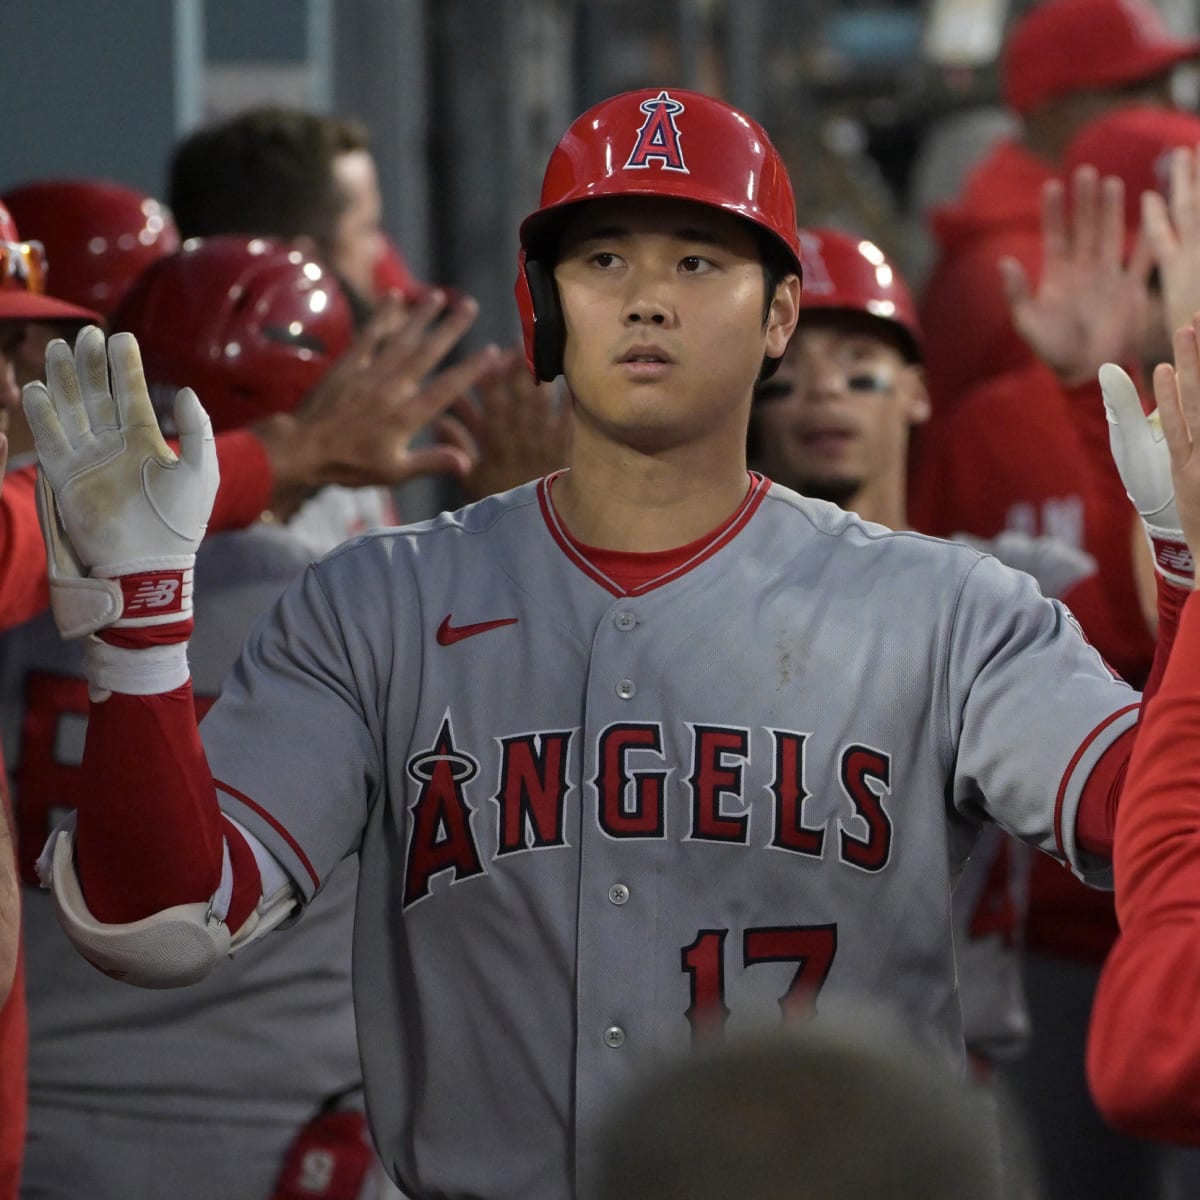 Ohtani feels a lengthy MLB lockout could impact his motivation